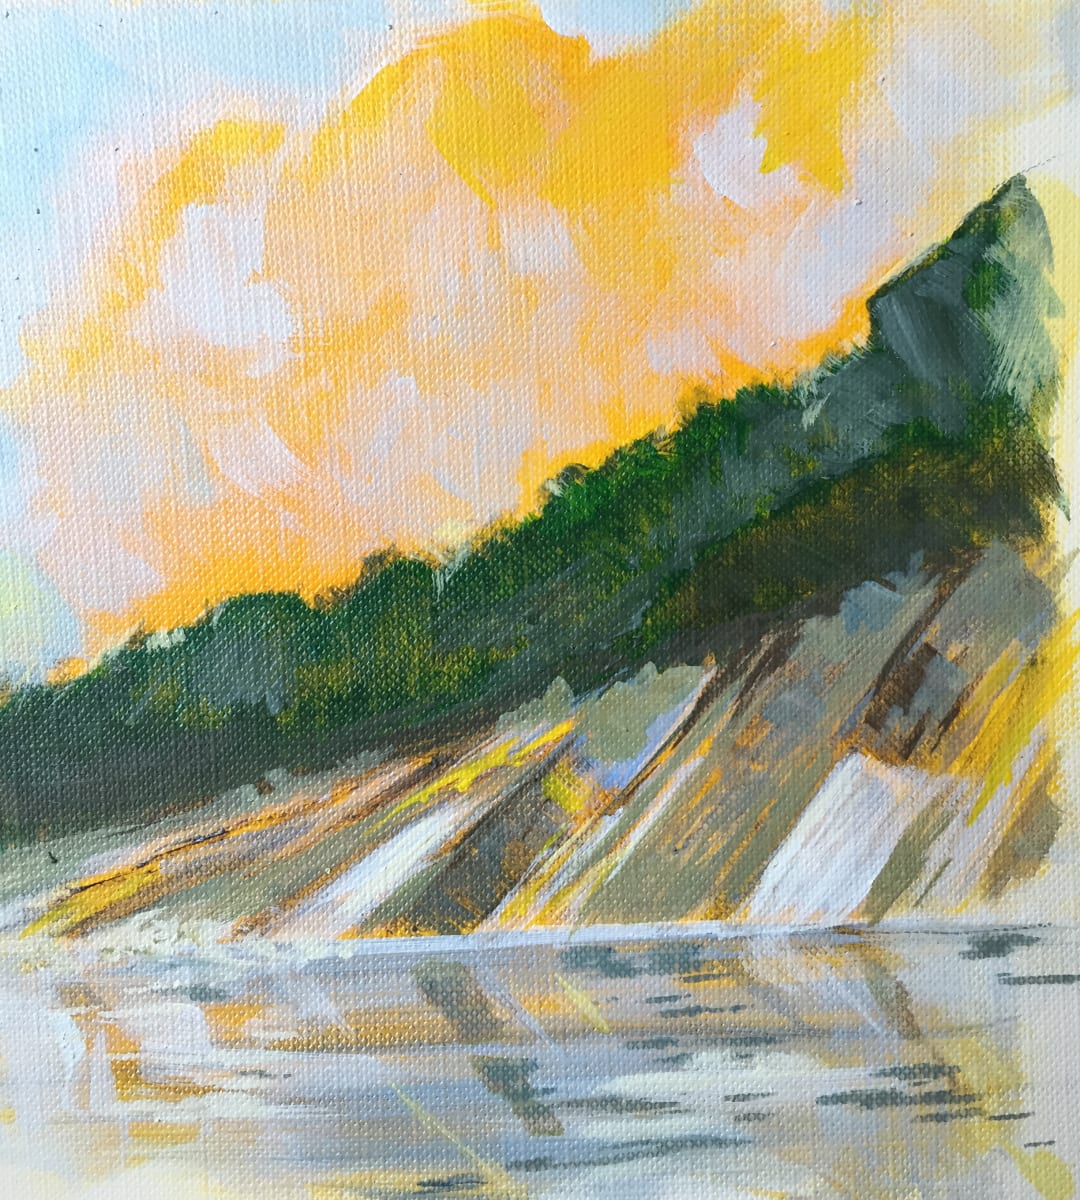 Flat Rocks treeline by Karen Phillips~Curran  Image: Flat Rocks
This little one (6"x6") is part of a series on canvas paper with a vibrant yellow background. 